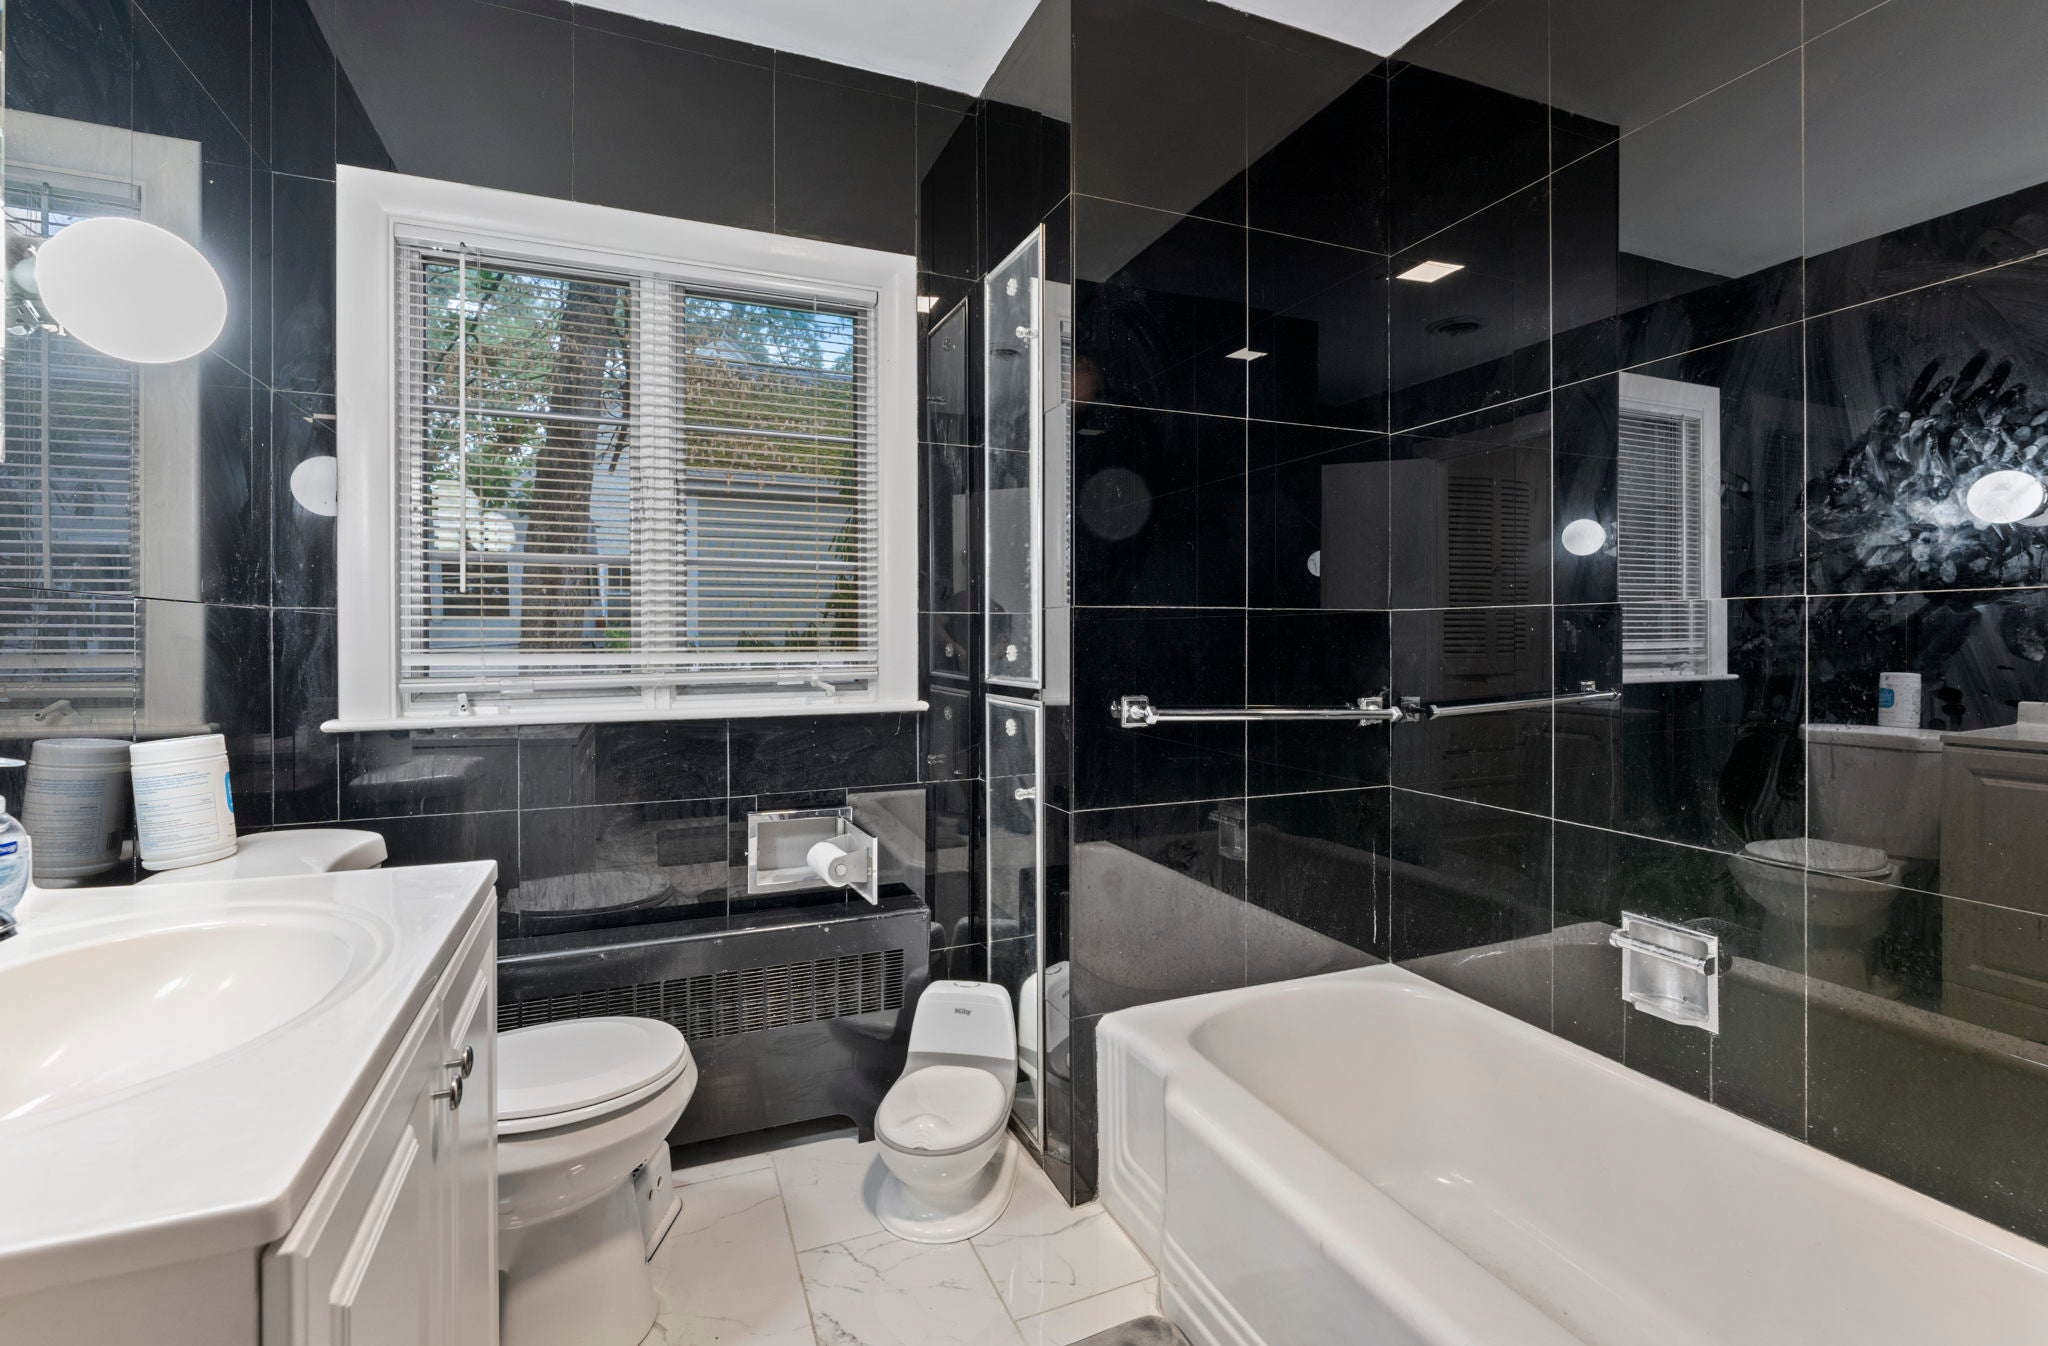 A bathroom with a tub/shower combination, a white vanity, a white tile floor, and large-format black tile walls.